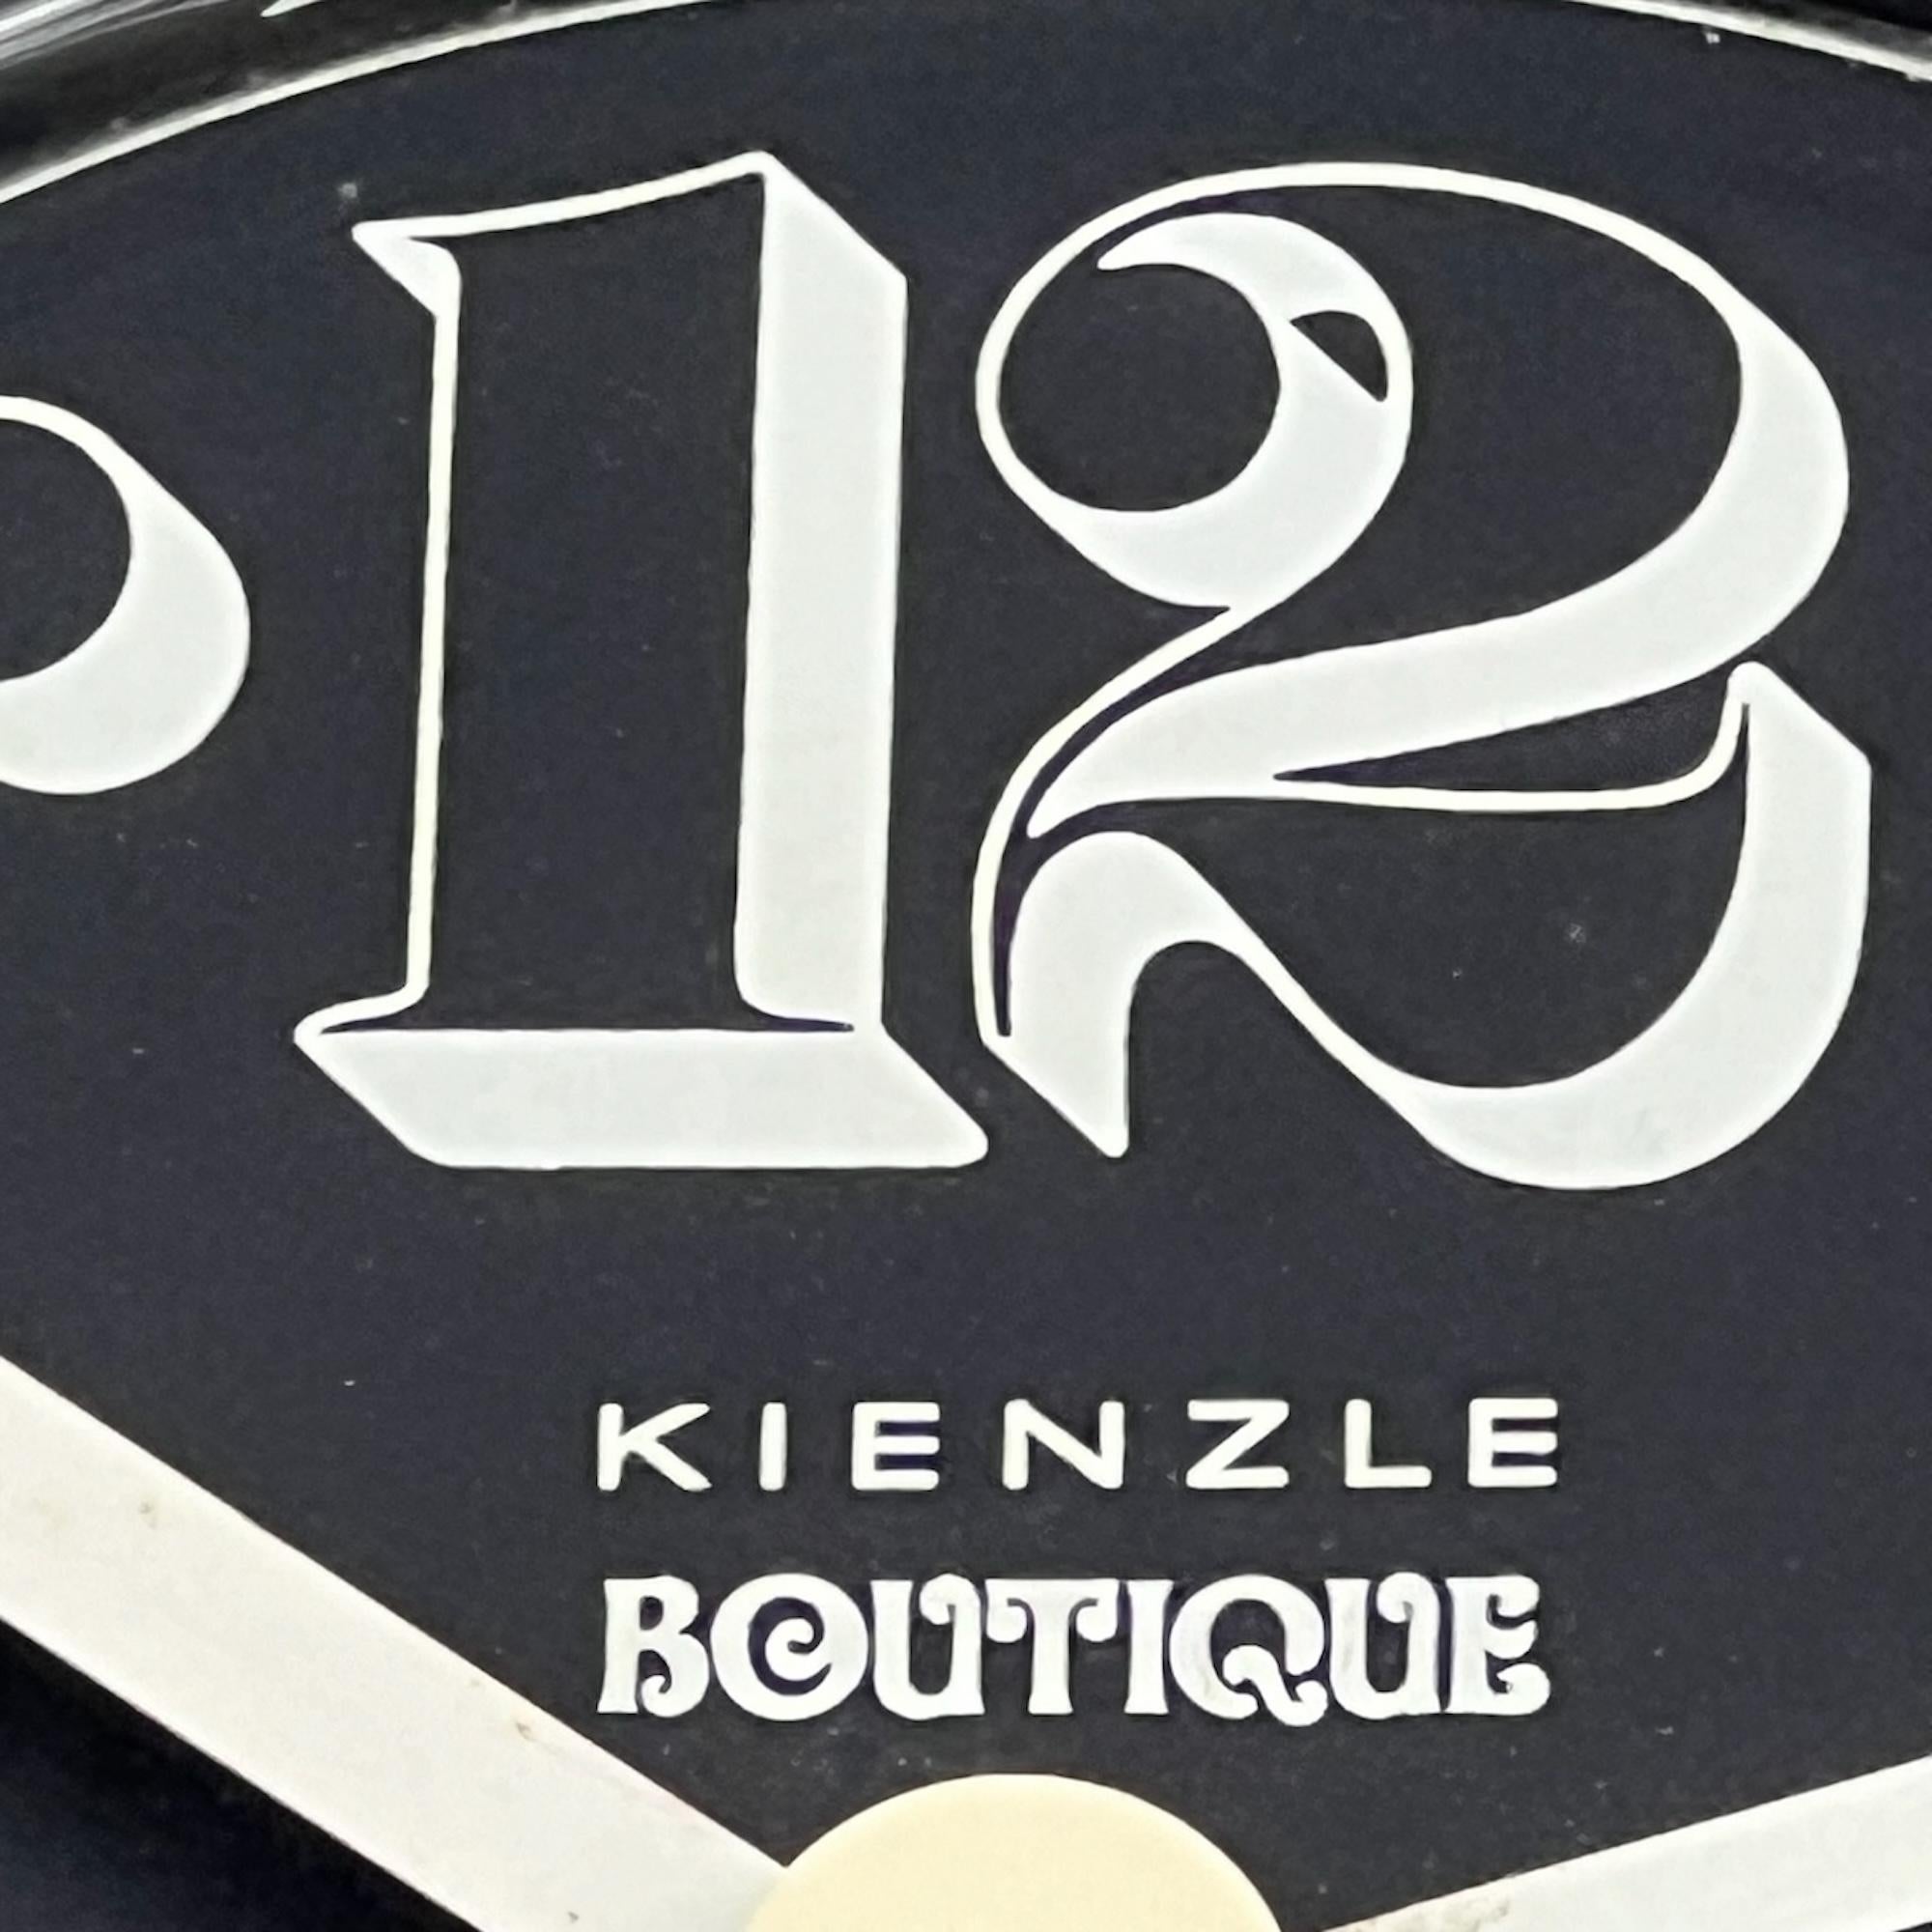 Kienzle 'Boutique' Space Age Wall Clock - Iconic 1970s Design West Germany  For Sale 4